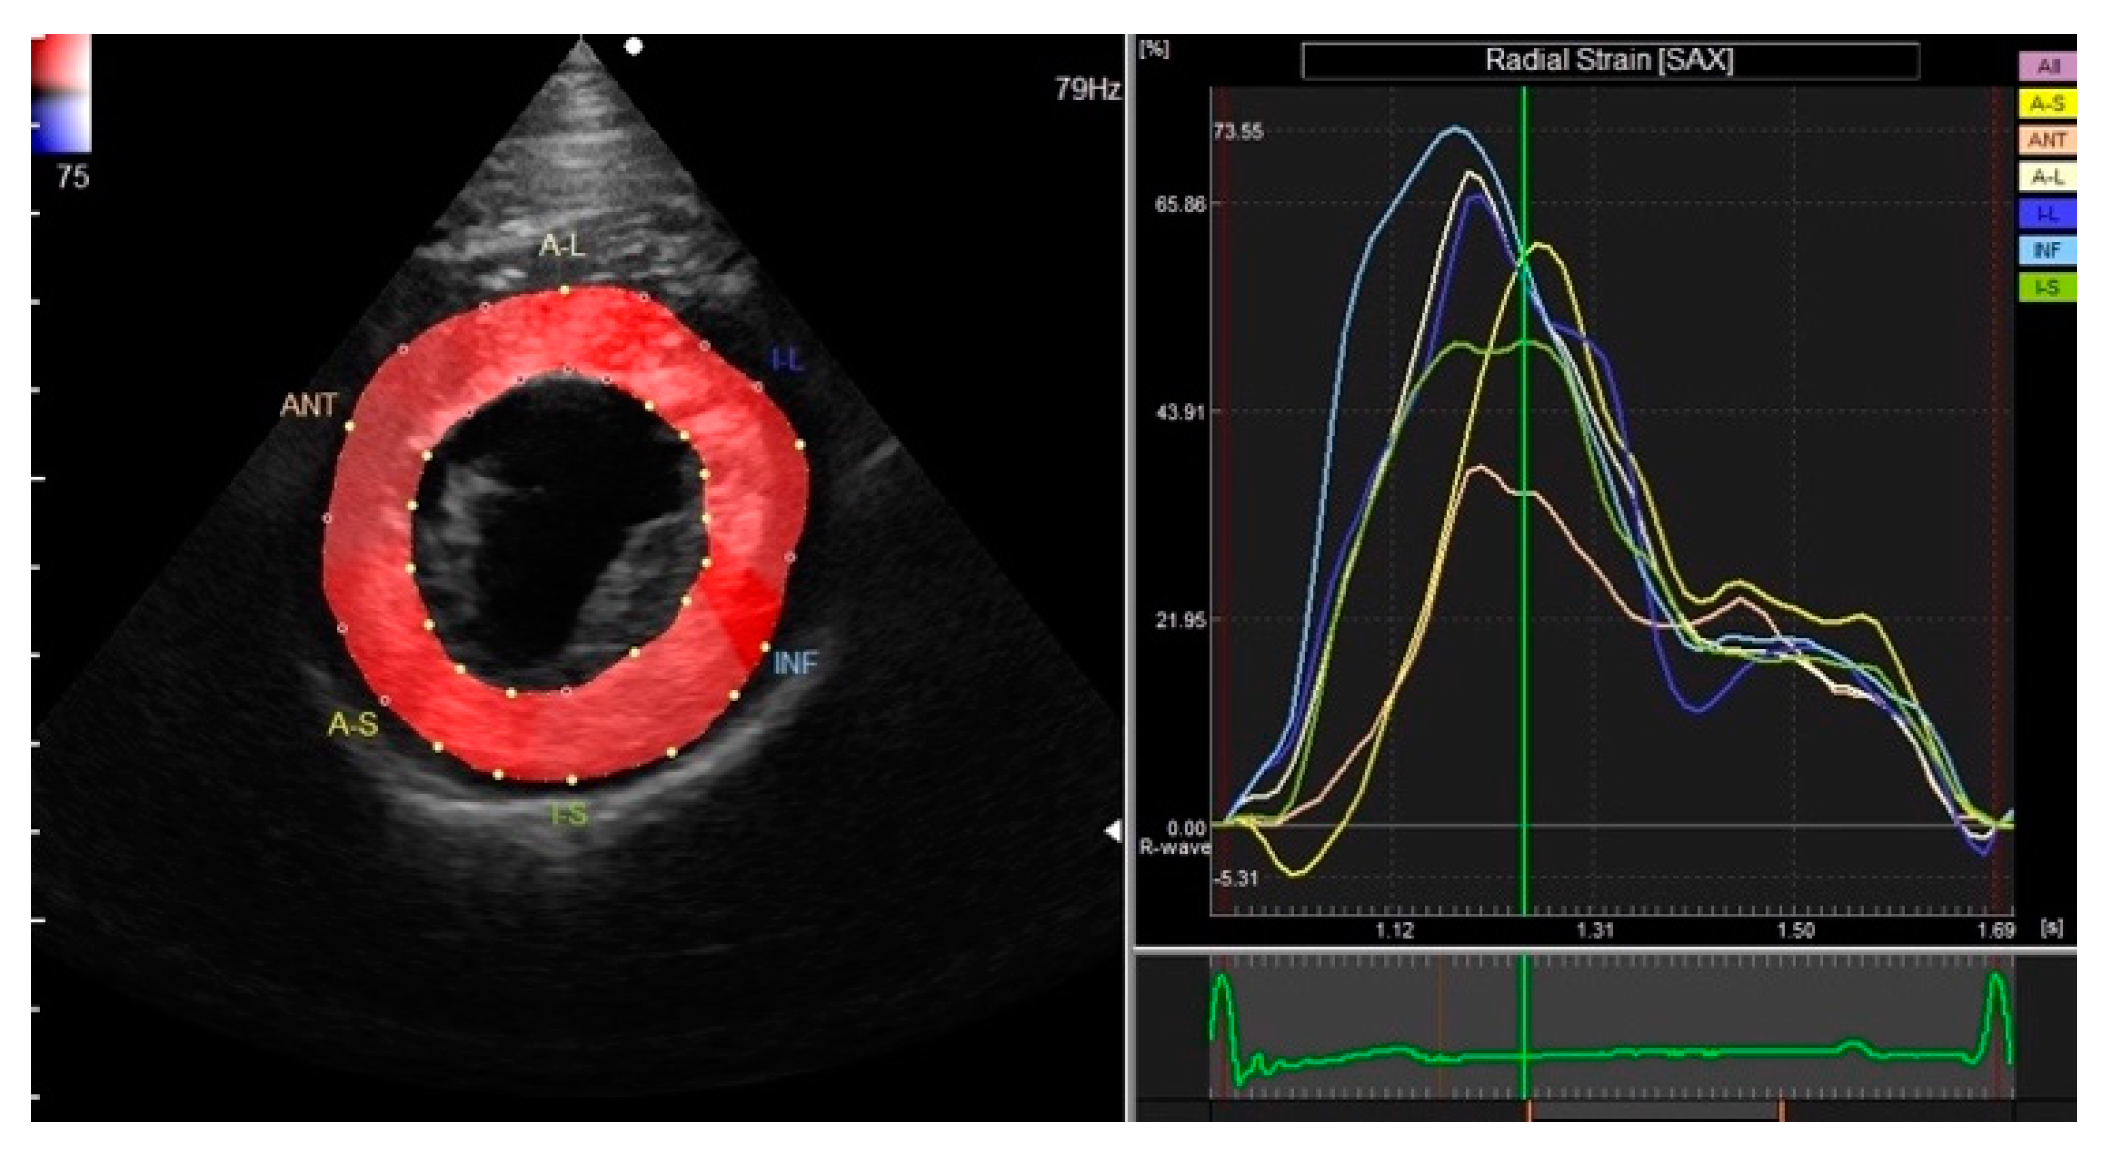 Comprehensive Left Ventricular Mechanics Analysis by Speckle Tracking  Echocardiography in COVID-19